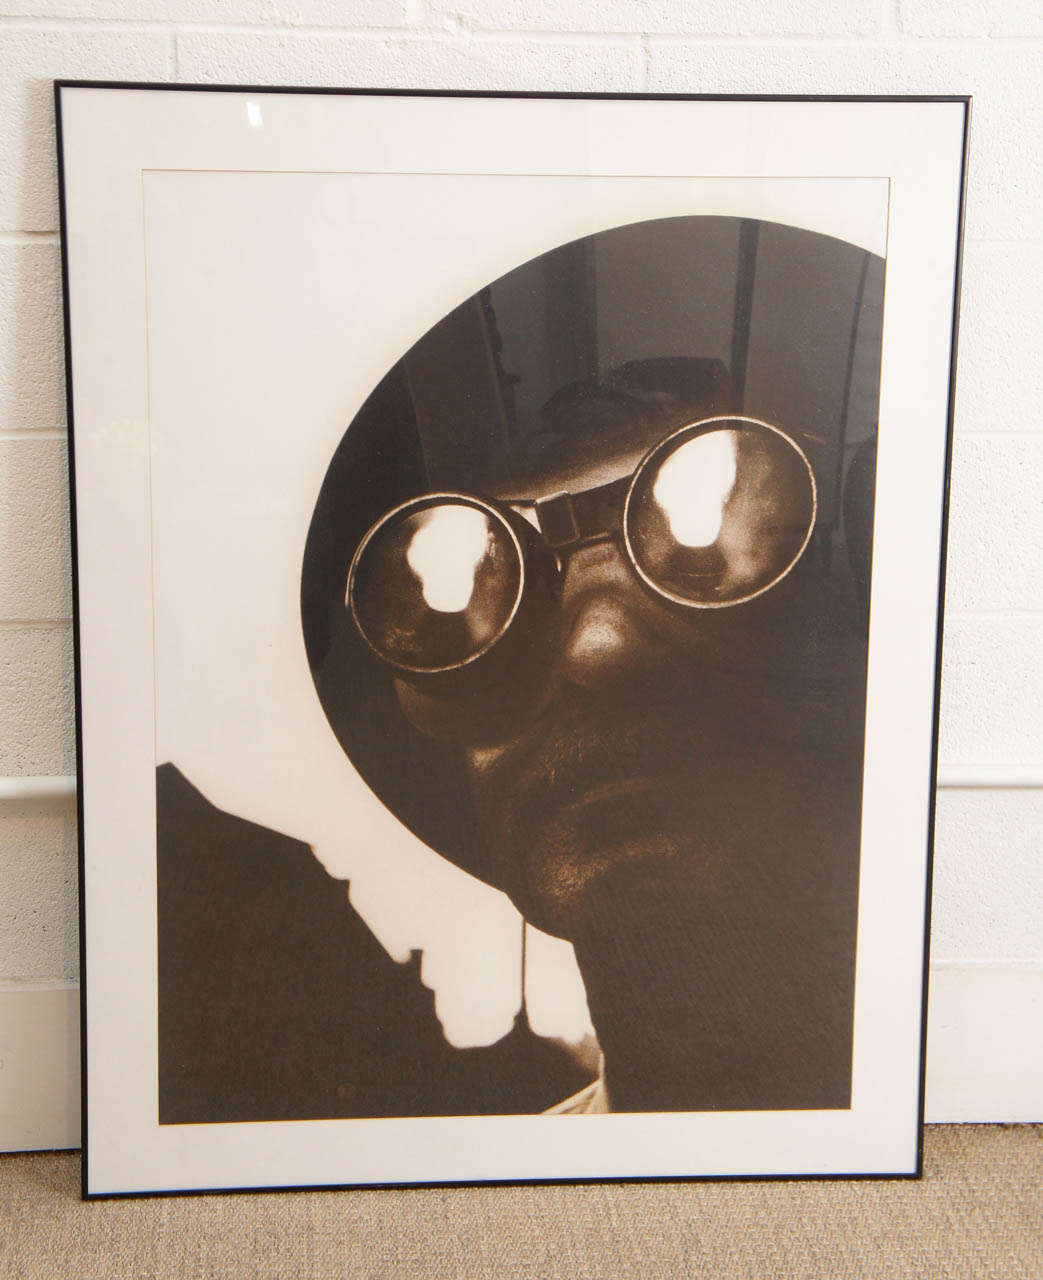 This is an offset print of an image of a man wearing goggles with a reflection of flames. The sepia toned image makes a bold and graphic statement.